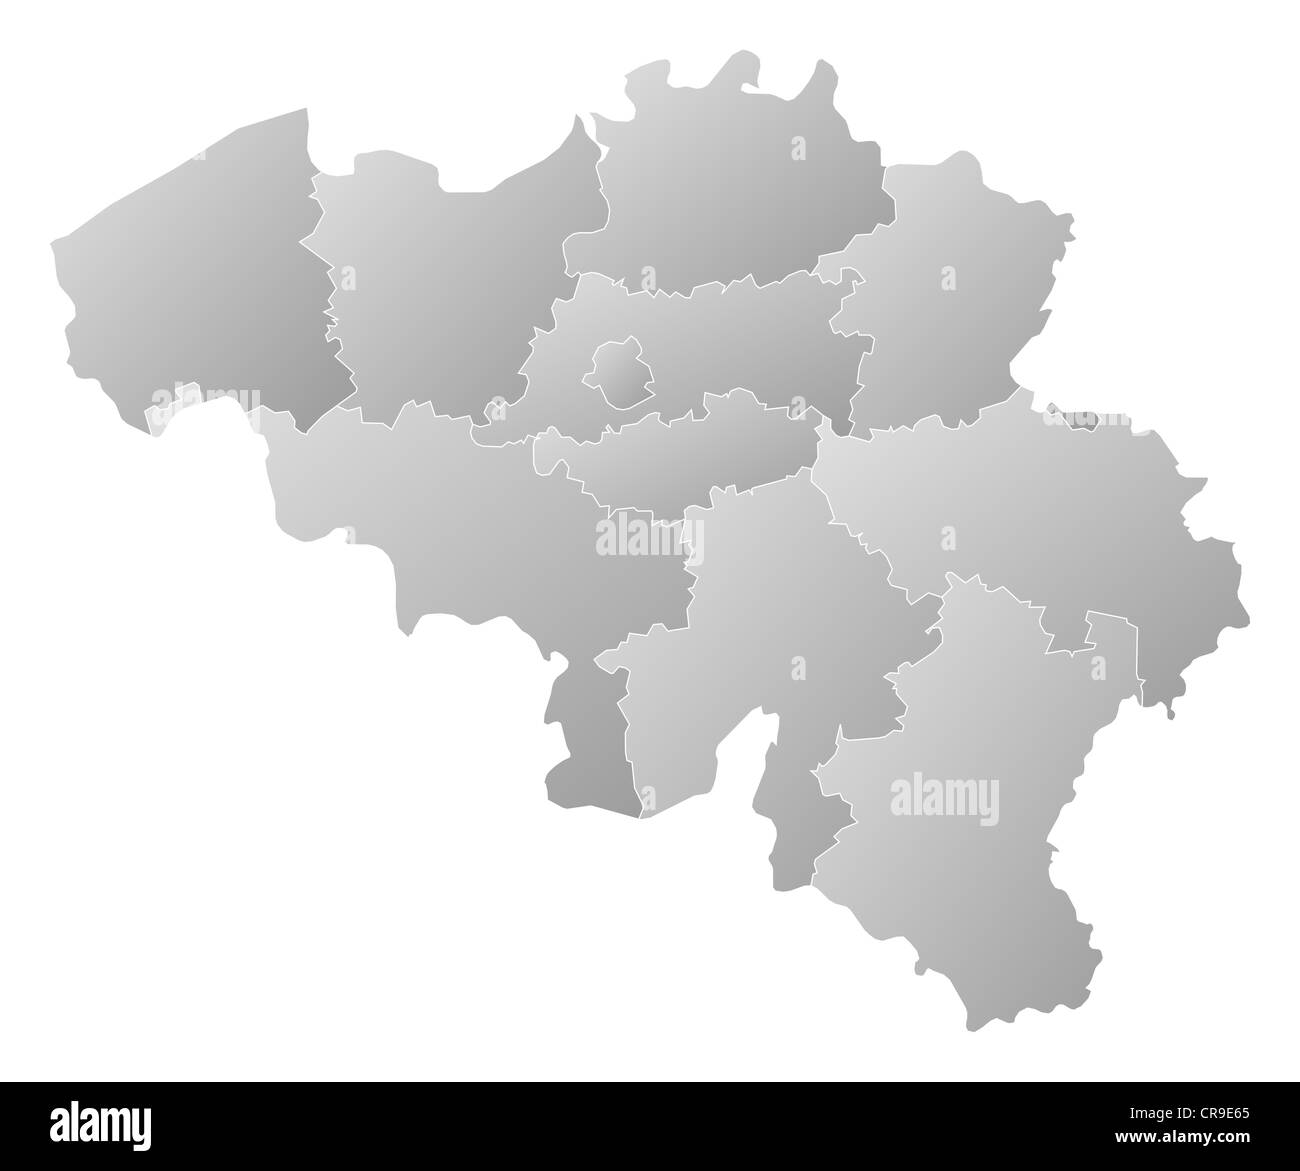 Political map of Belgium with the several states. Stock Photo